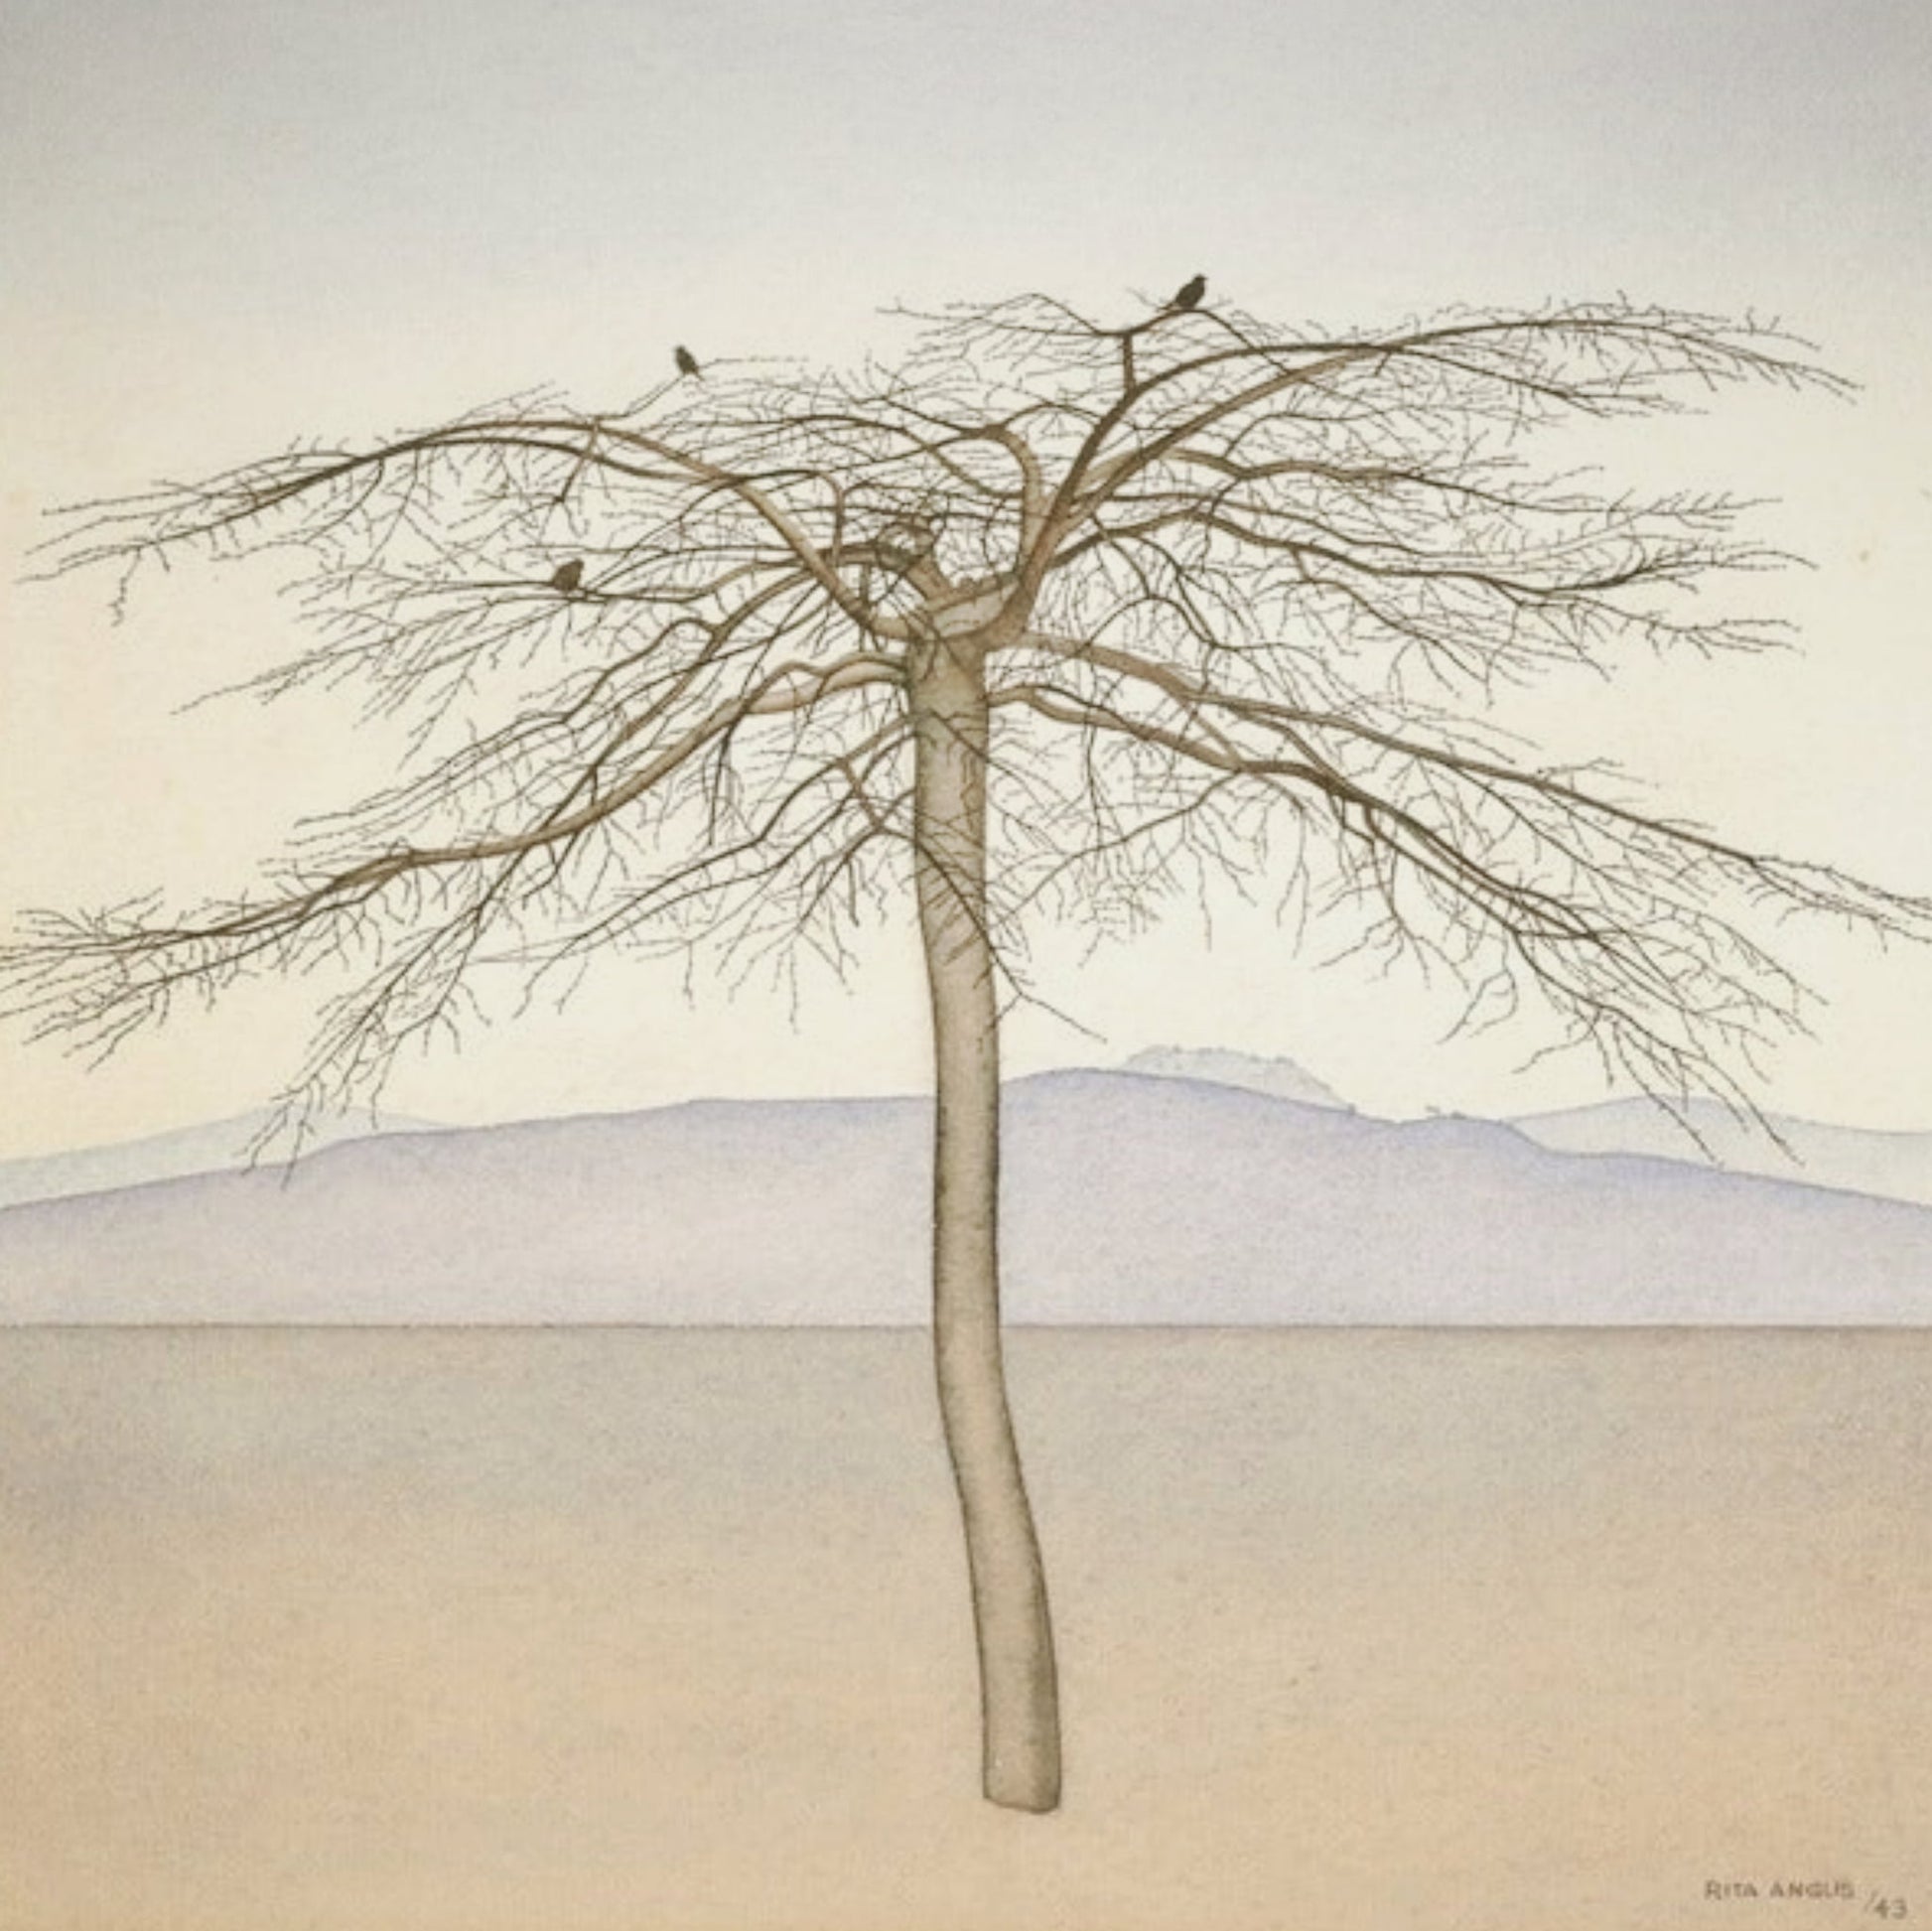 Print of a leafless tree with birds